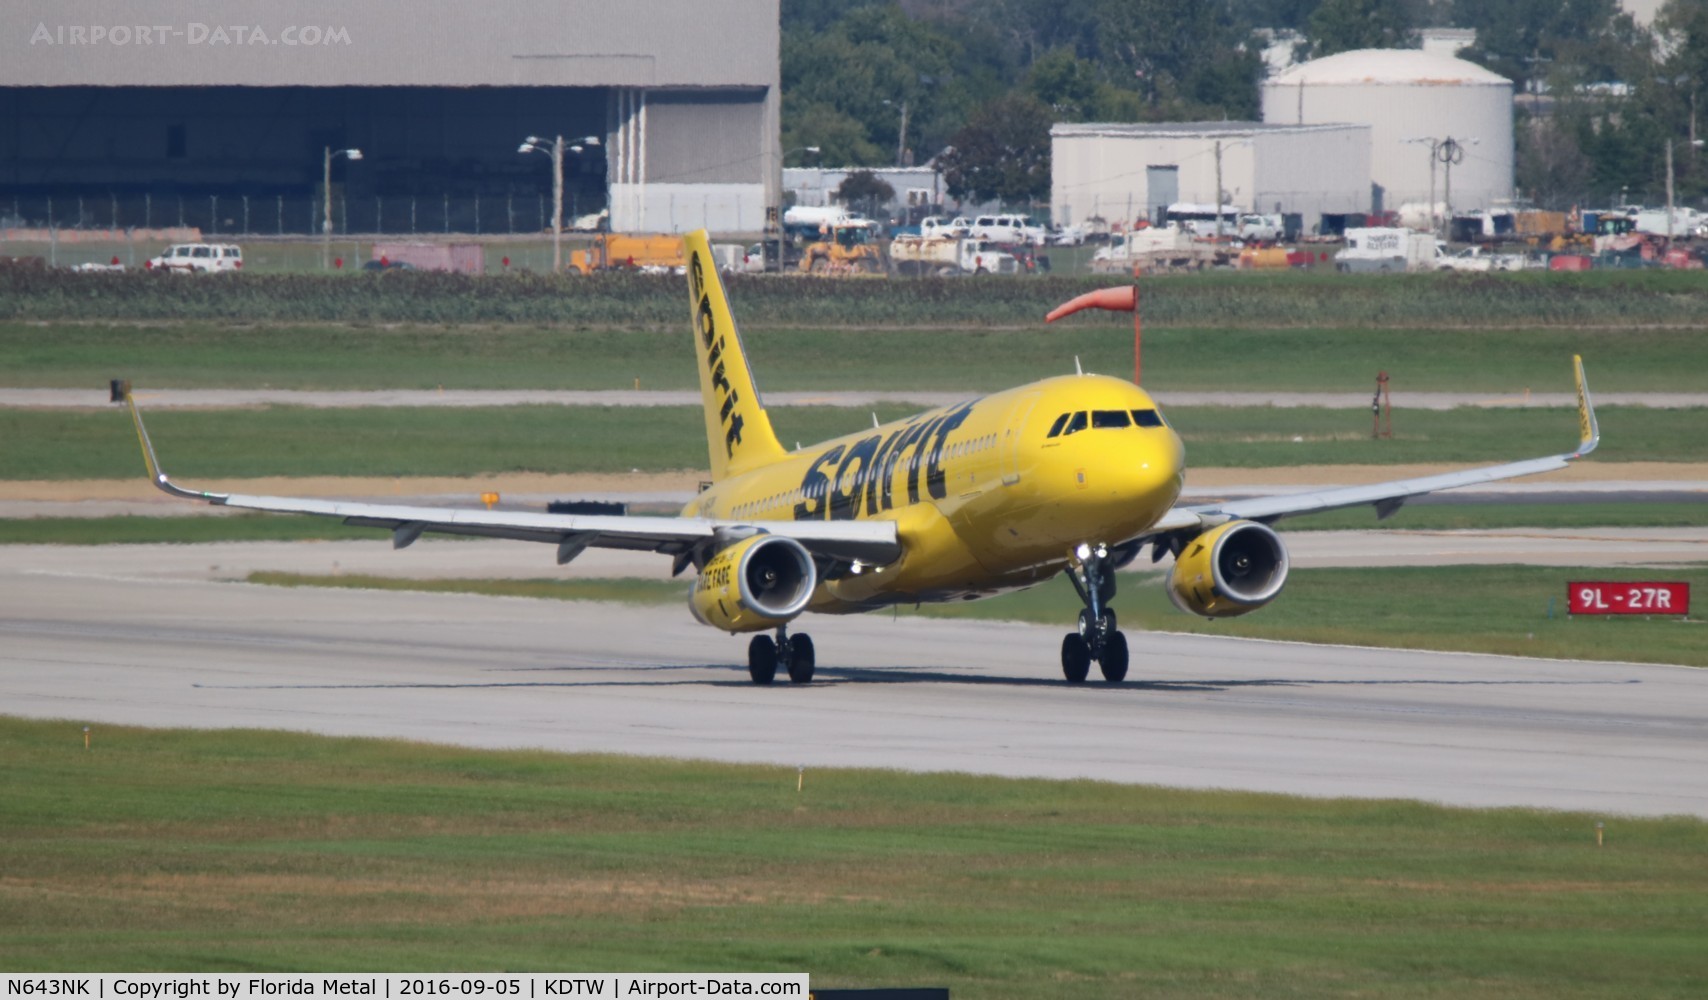 N643NK, 2015 Airbus A320-232 C/N 6616, NKS A320 yellow zx DTW-RSW